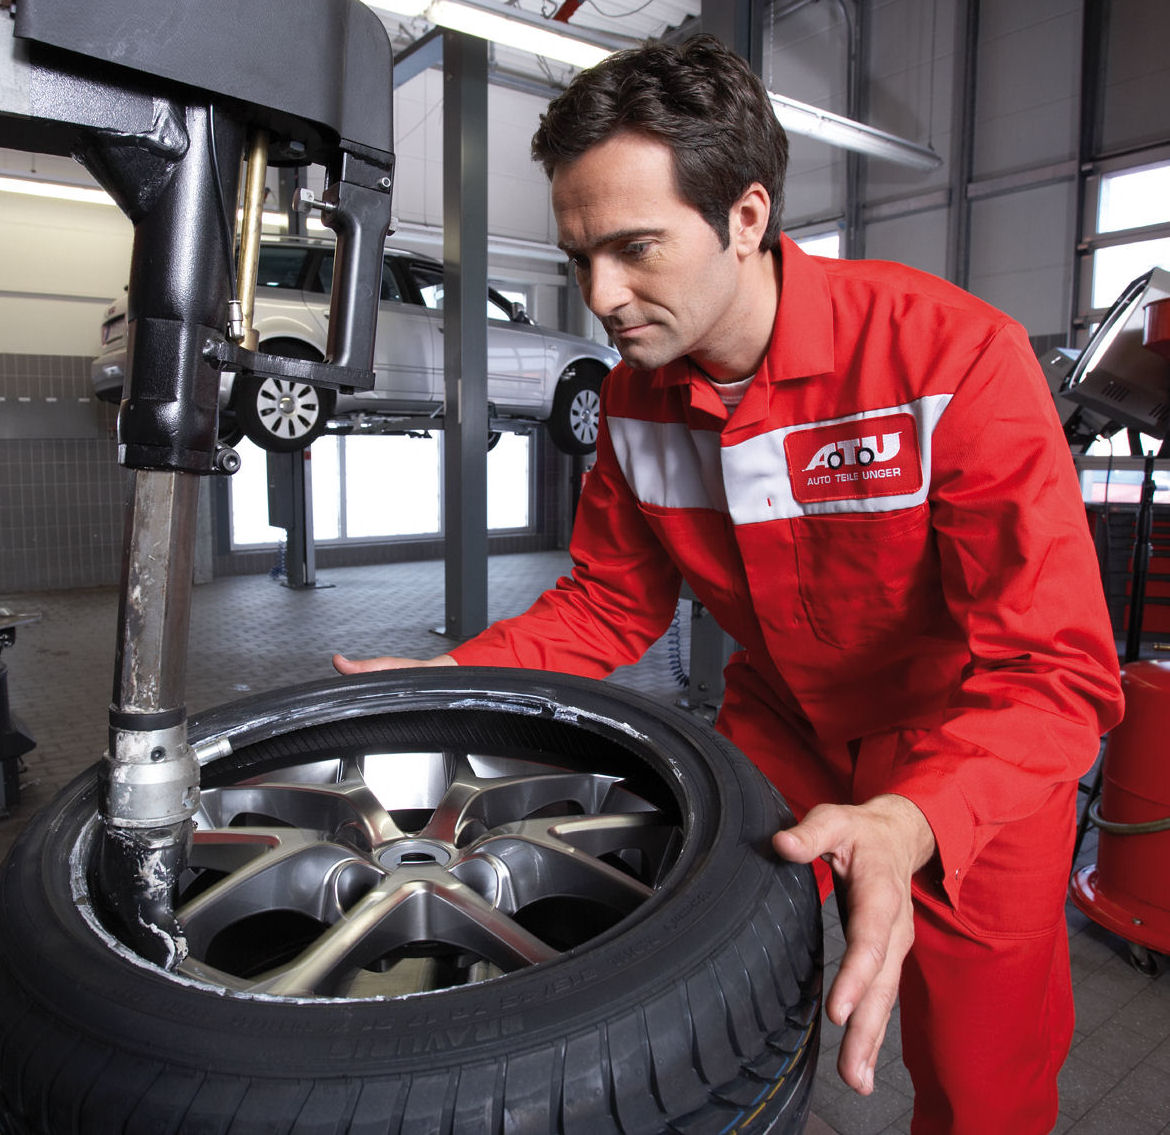 Mobivia Groupe to complete acquisition of tyre retailer A.T.U. this month